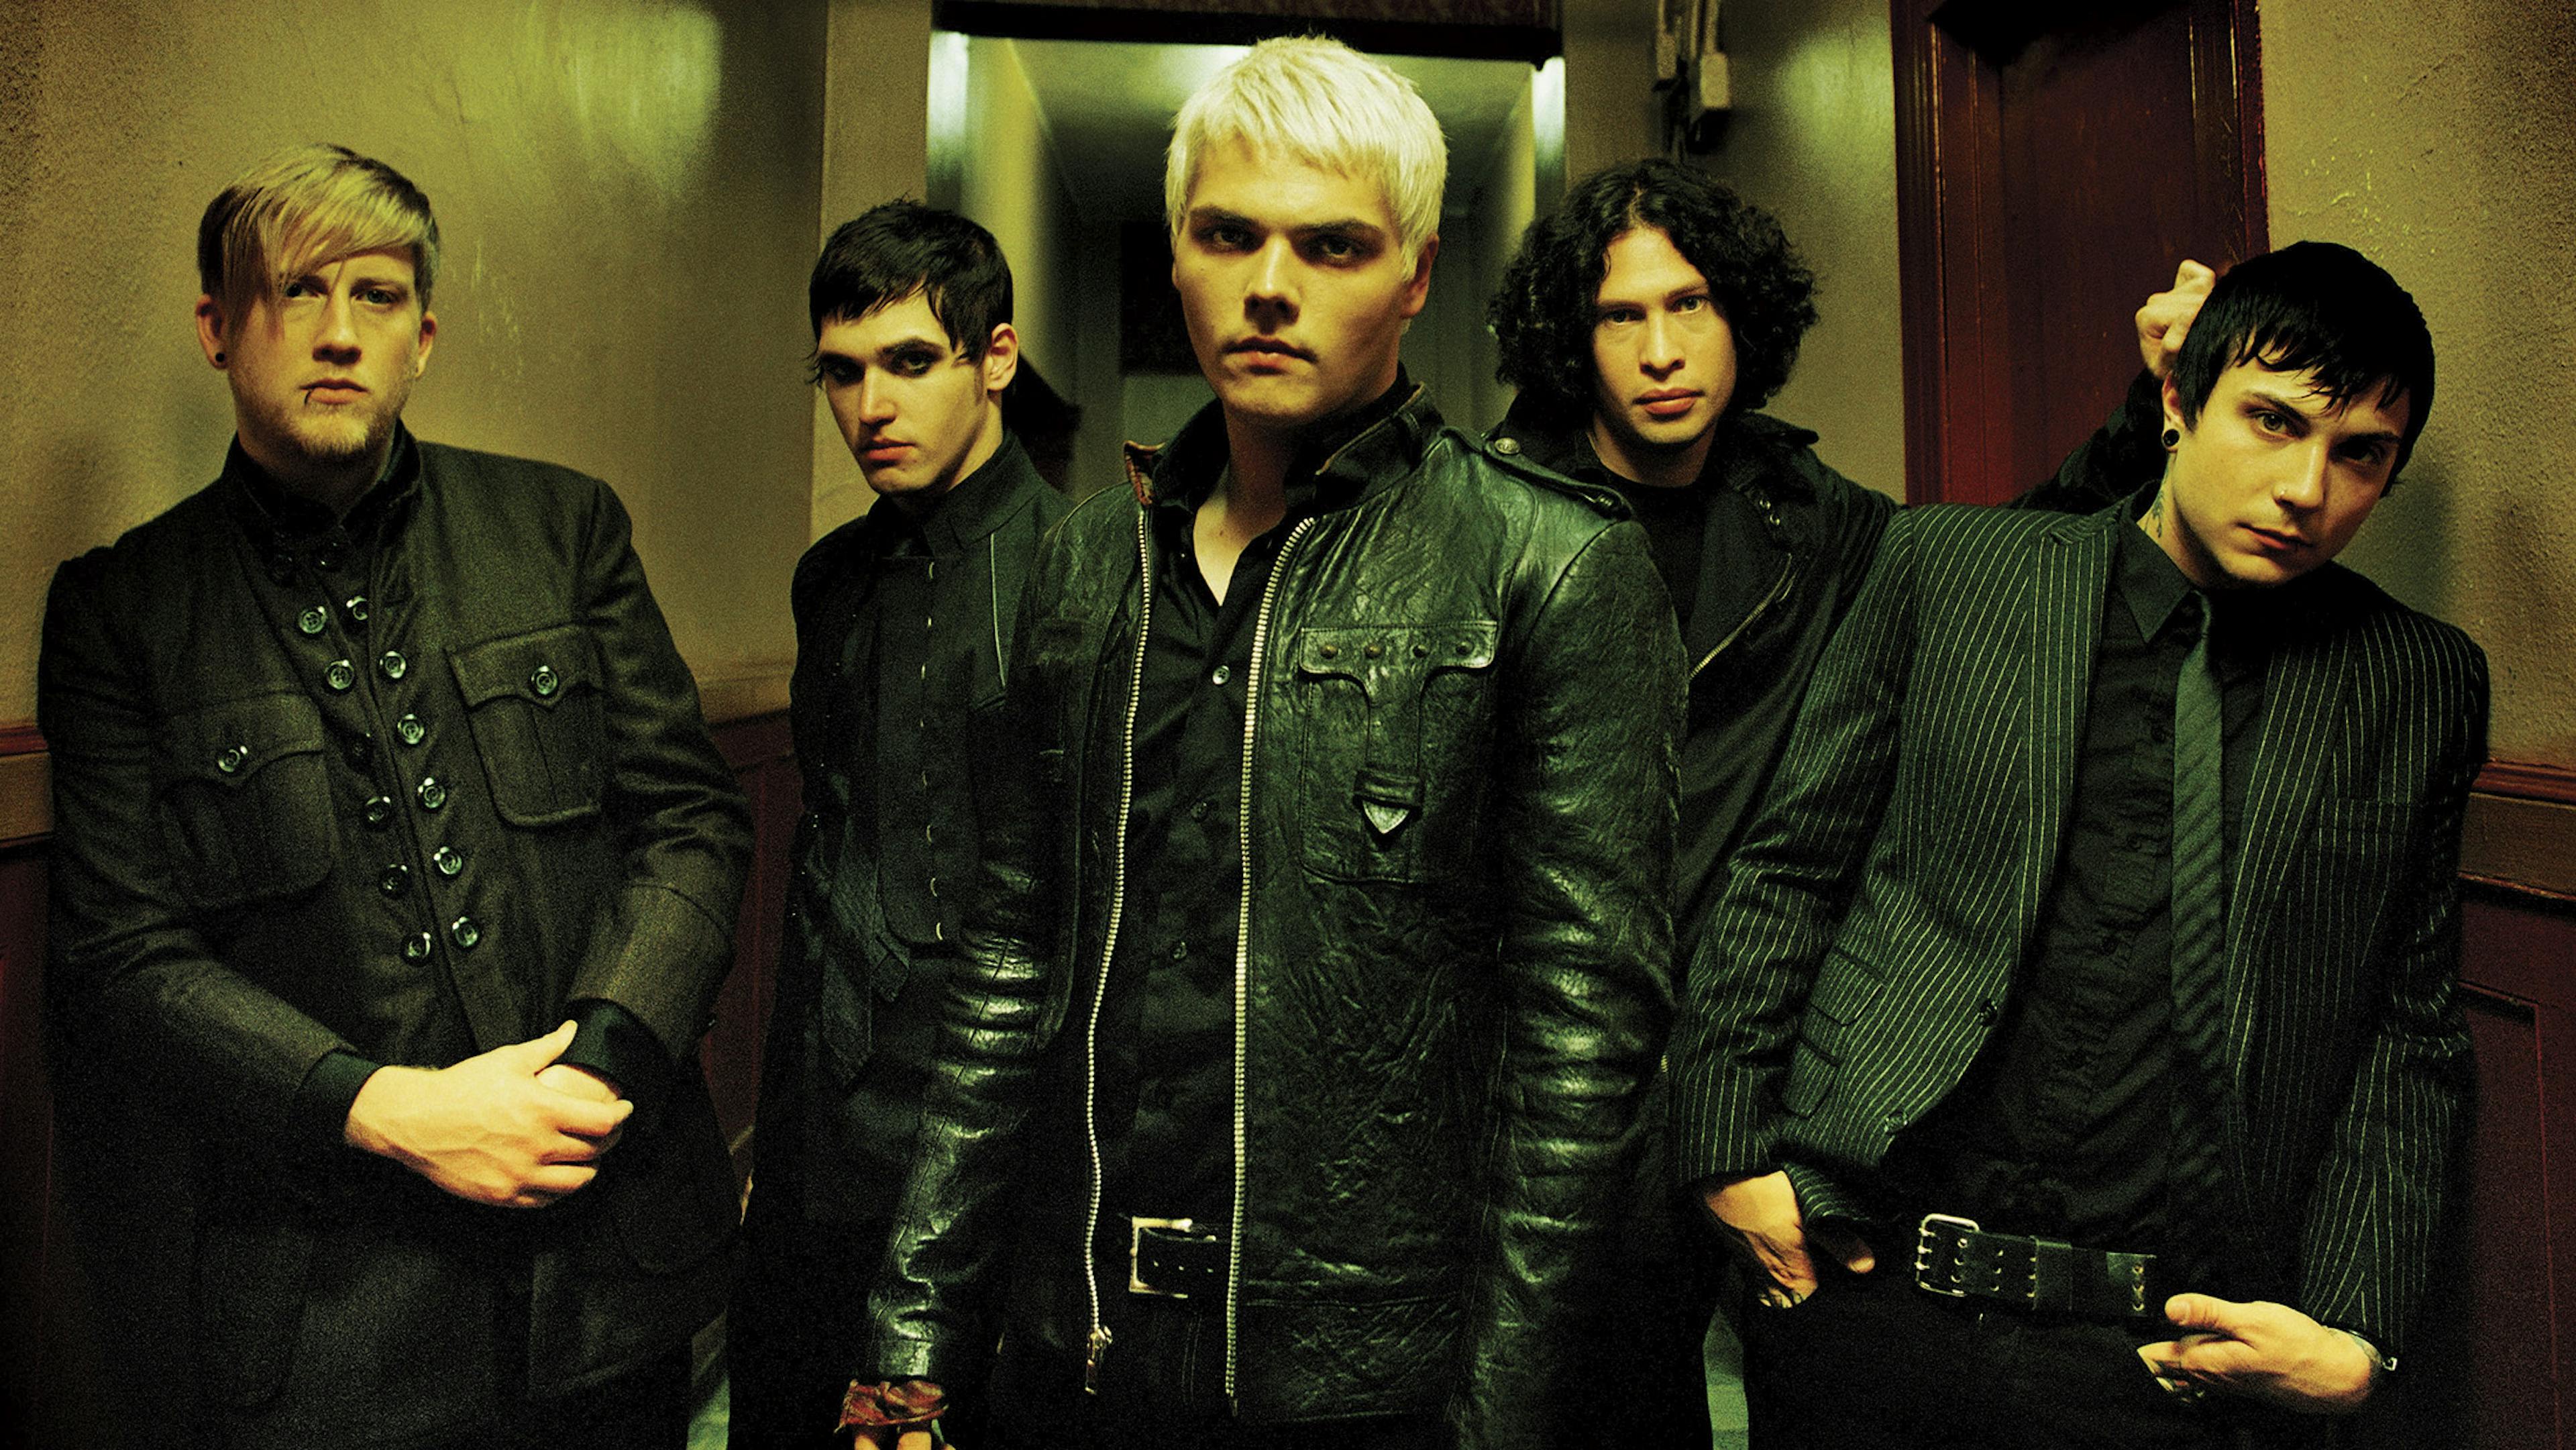 The 8 best covers performed by My Chemical Romance